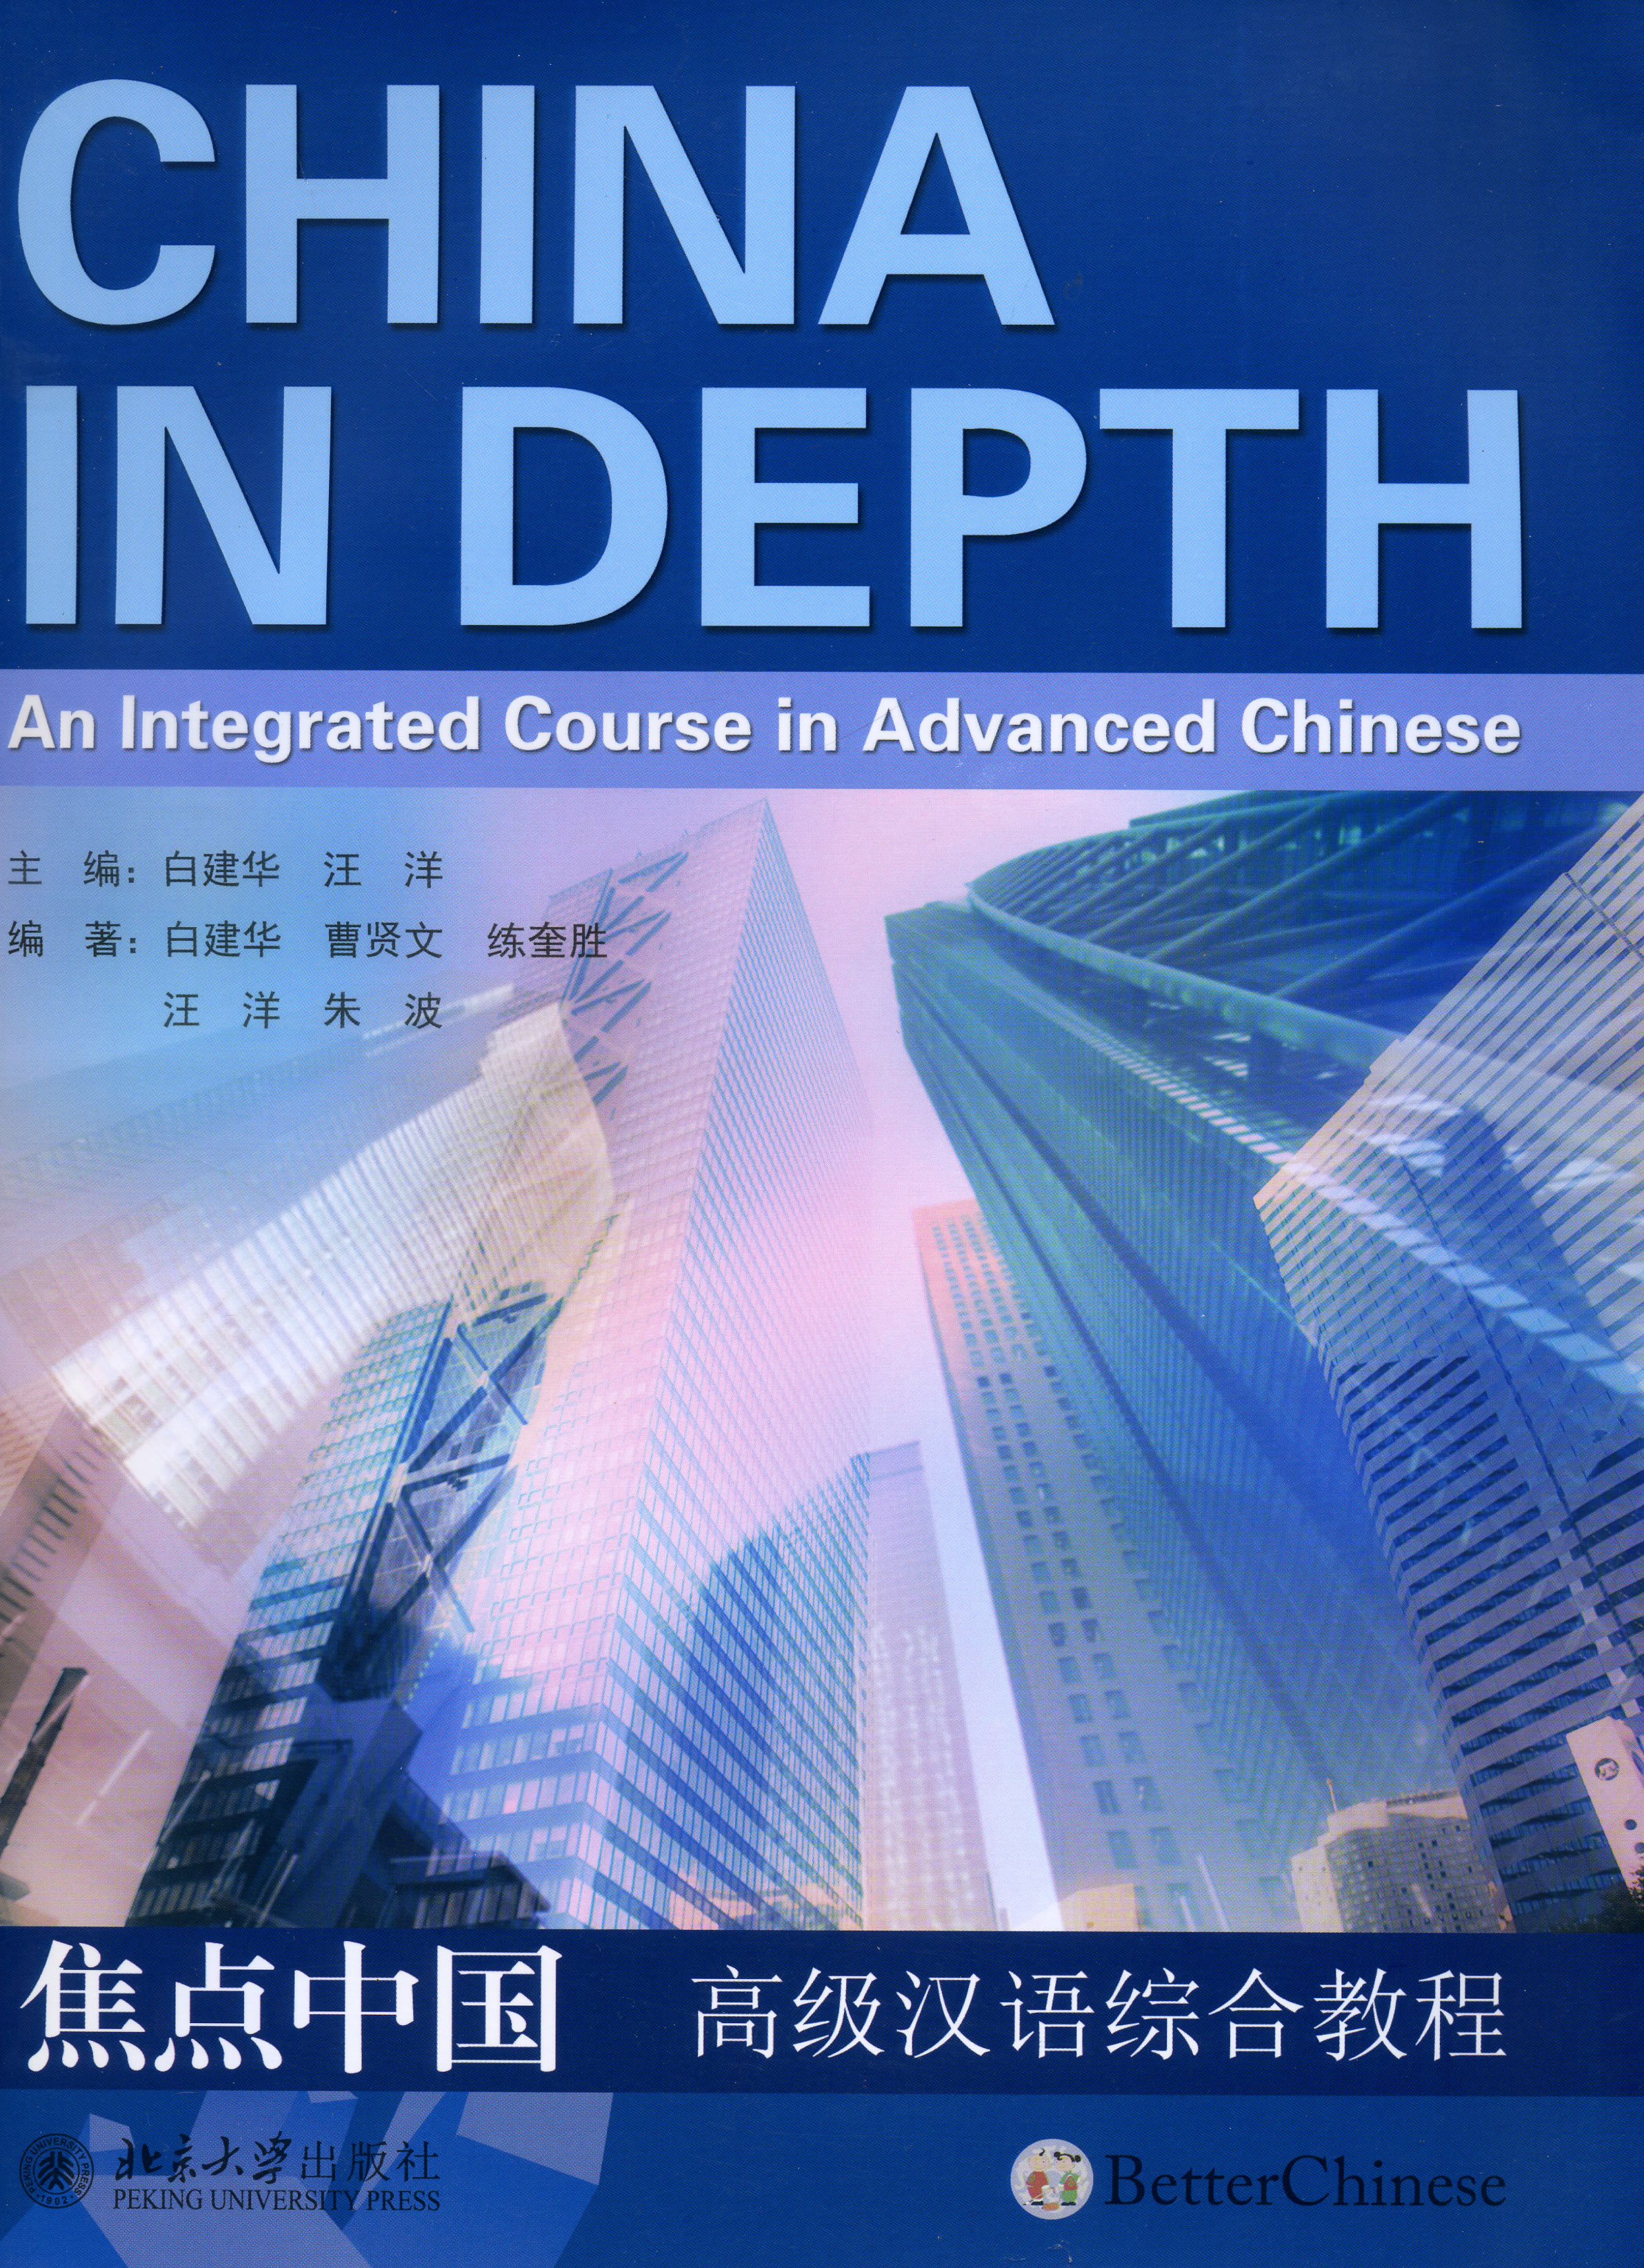 China in Depth - An Integrated Course in Advanced Chinese<br>ISBN: 978-7-301-26287-0, 9787301262870